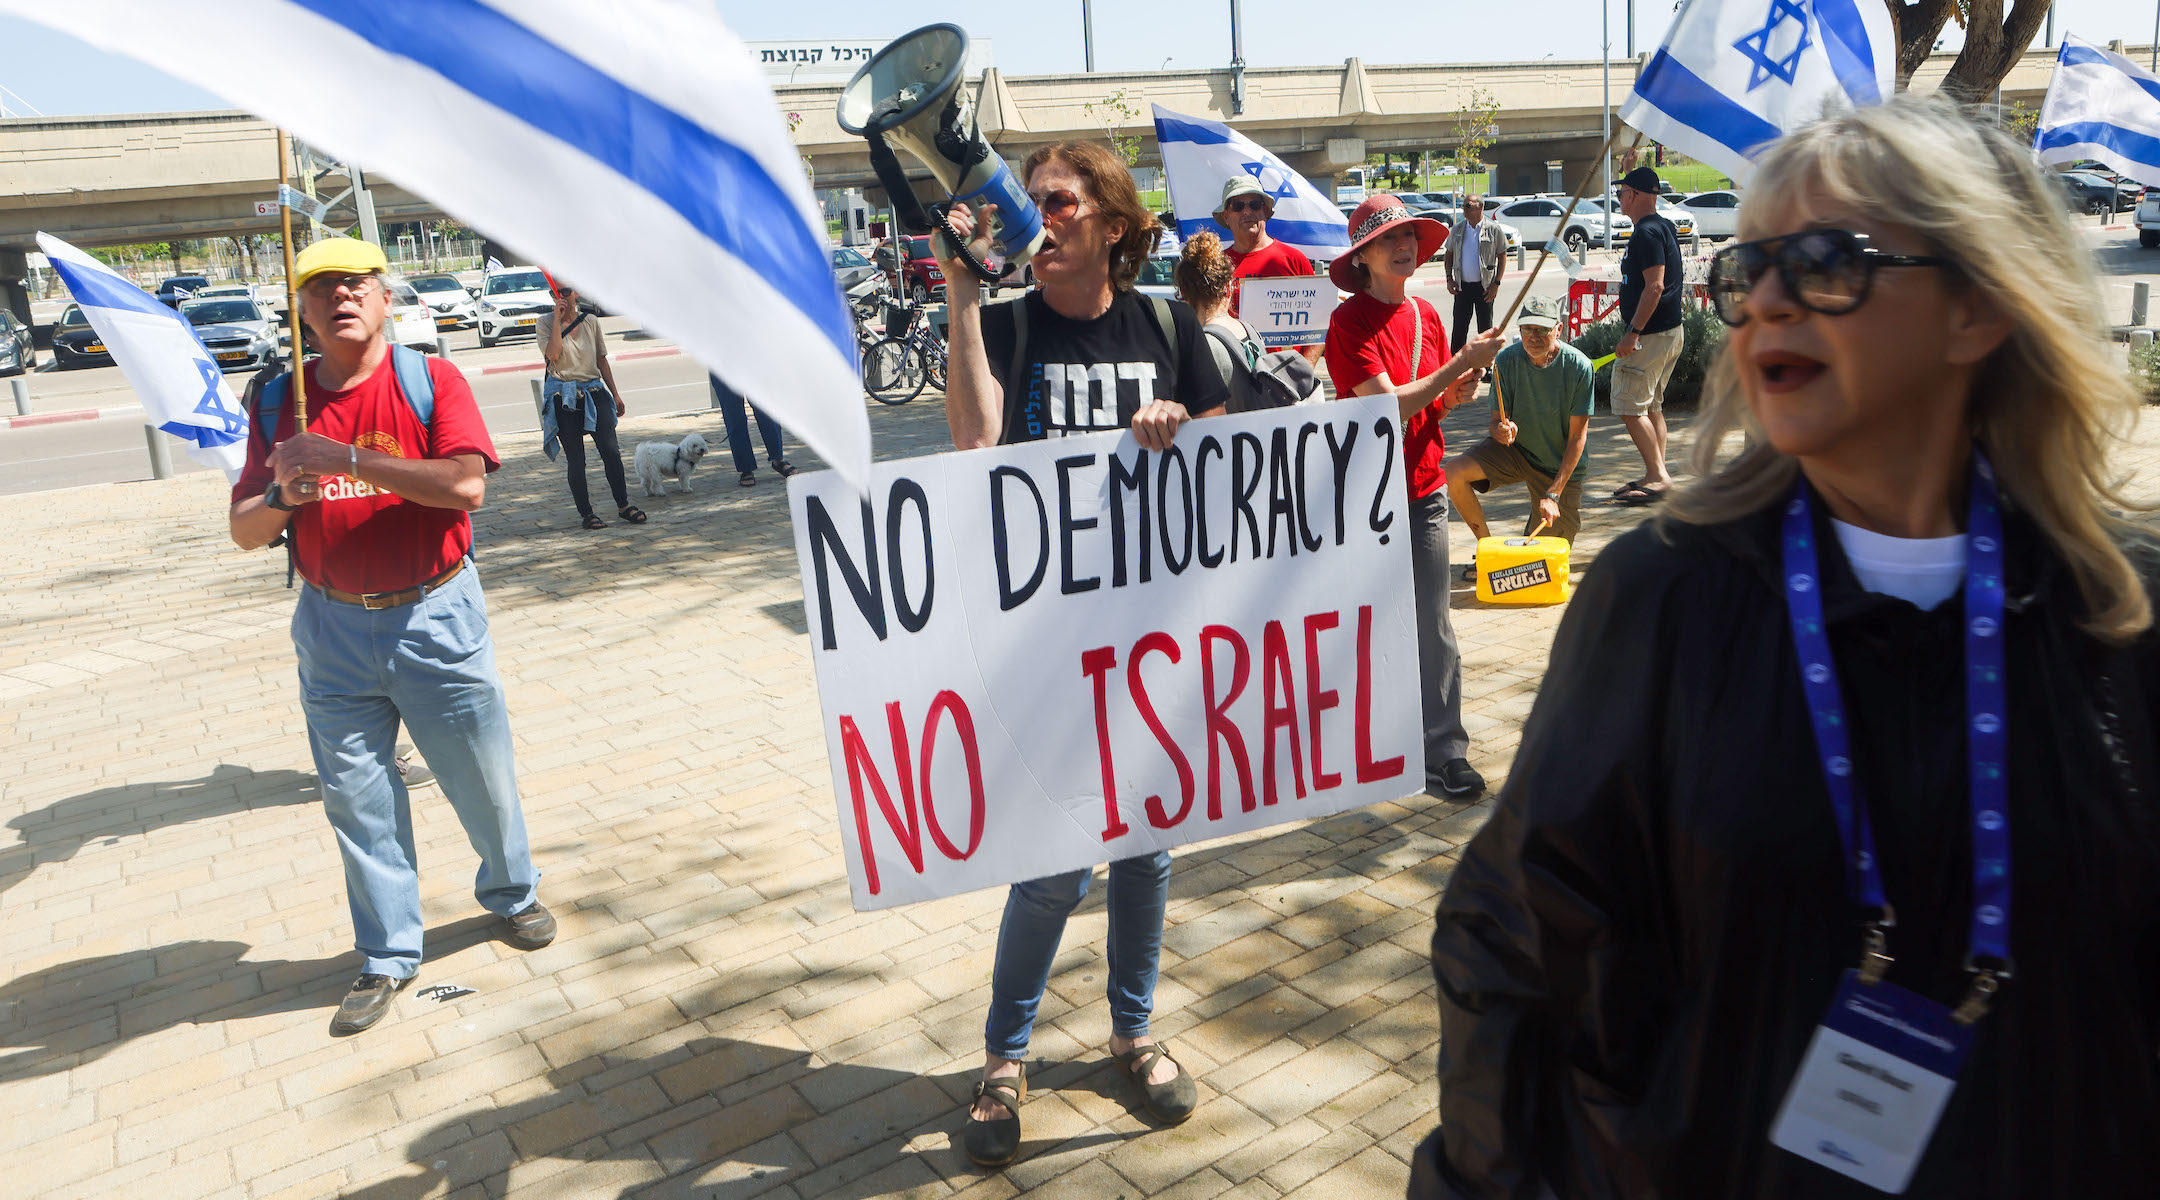 A protester demonstrates at the 2023 Jewish Federations of North America General Assembly in Tel Aviv as a conference attendee walks past. (Courtesy of JFNA/Amnon Gutman)